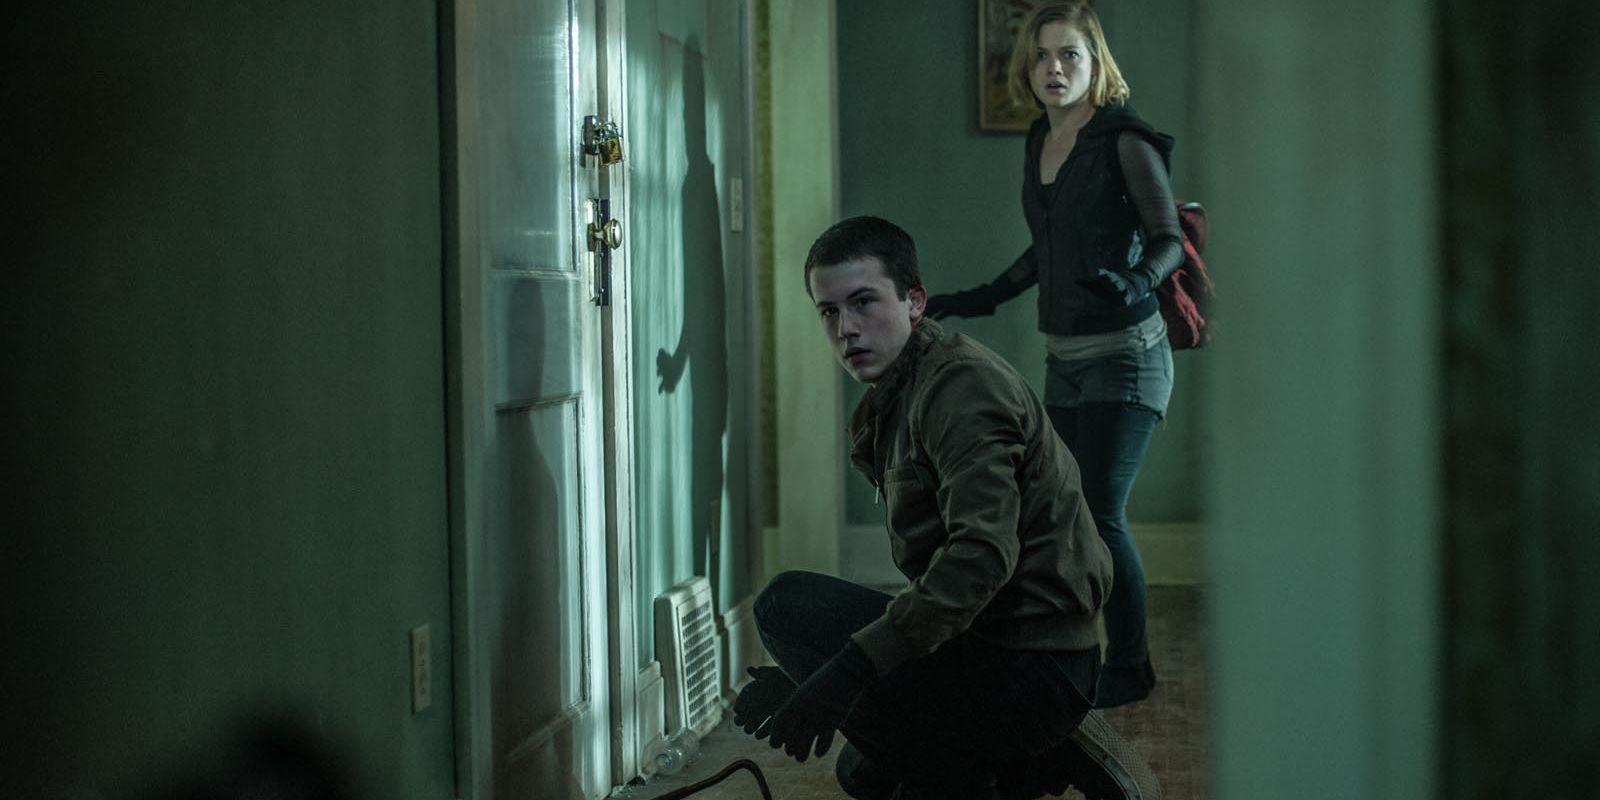 Dylan Minnette and Jane Levy in Don't Breathe